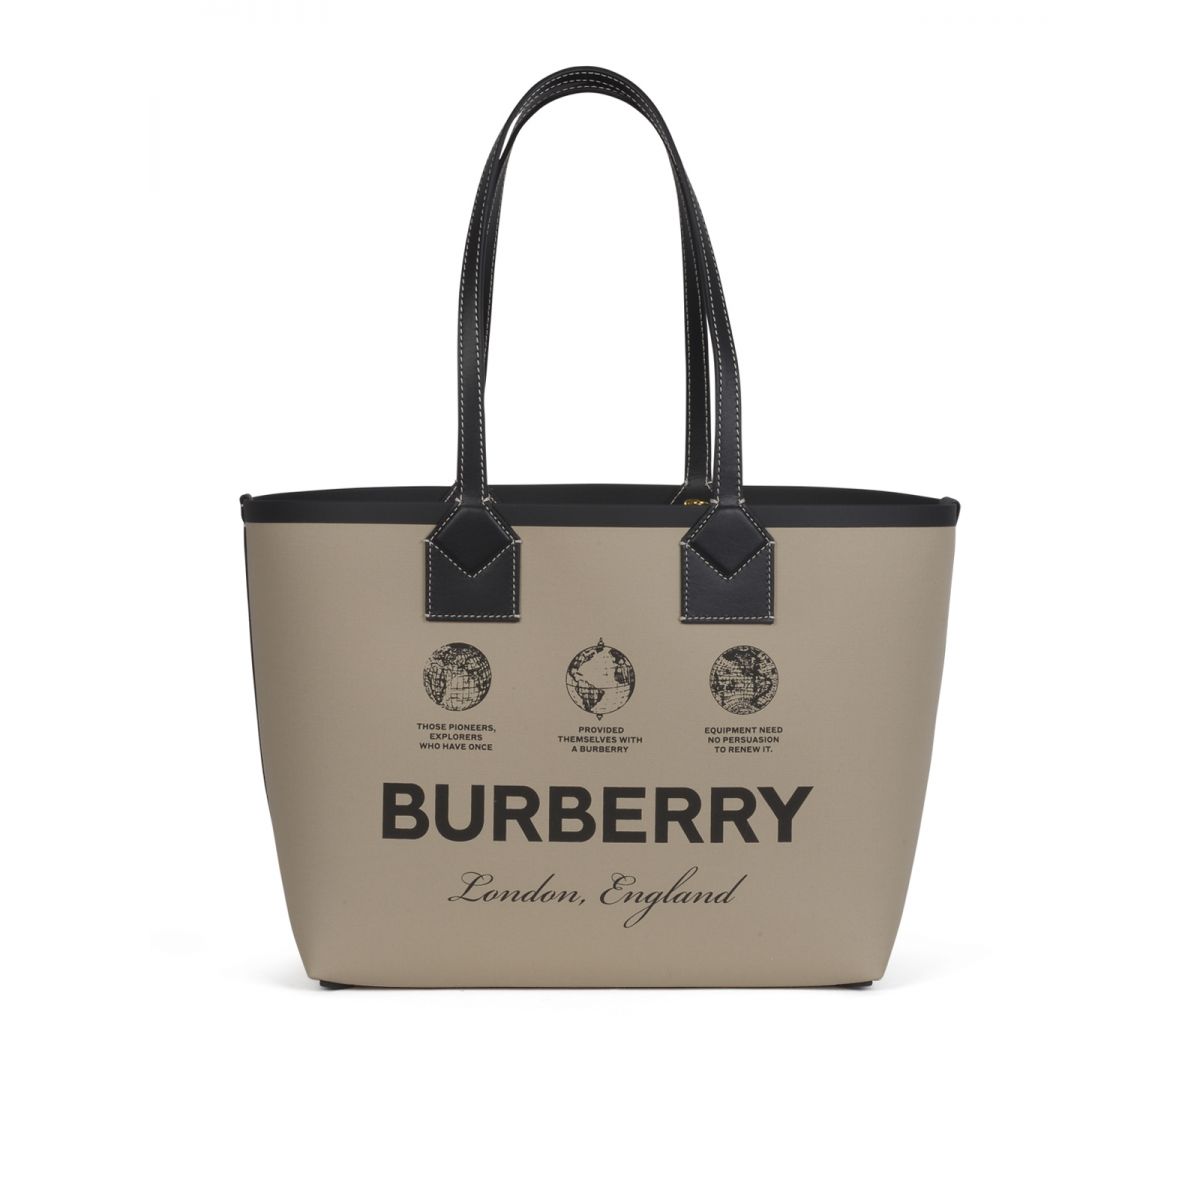 BURBERRY - Small London tote bag with a label motif